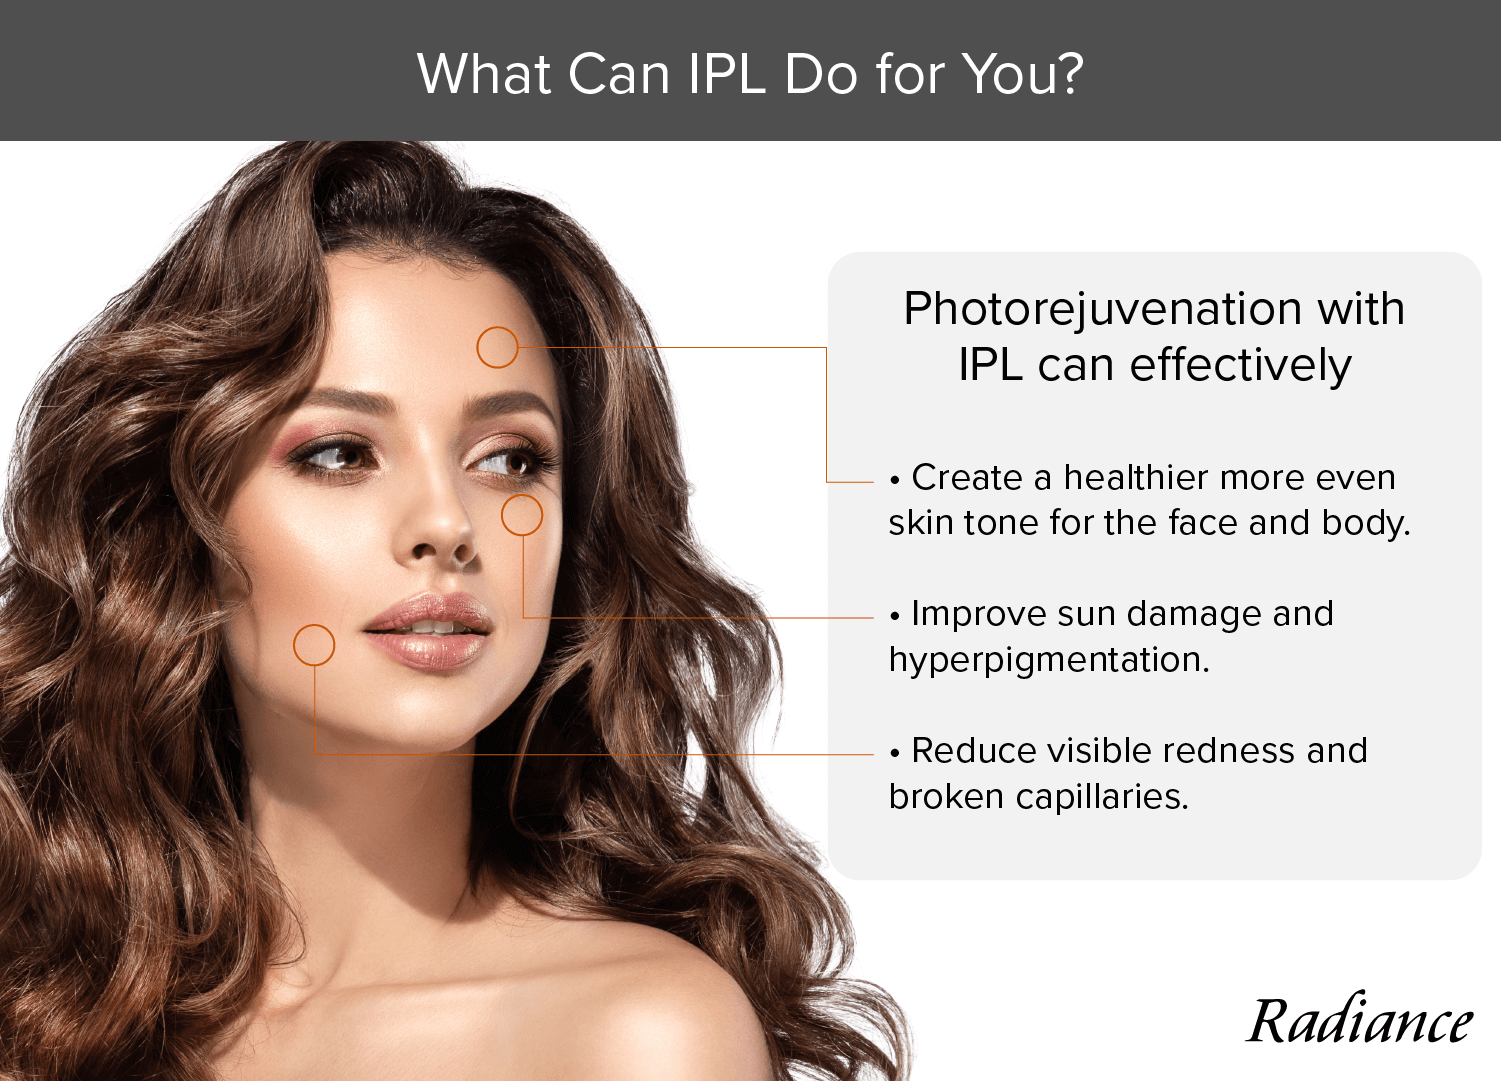 See what can be treated with photorejuvenation via intense pulsed light (IPL) at Madison’s Radiance Skin Therapy.